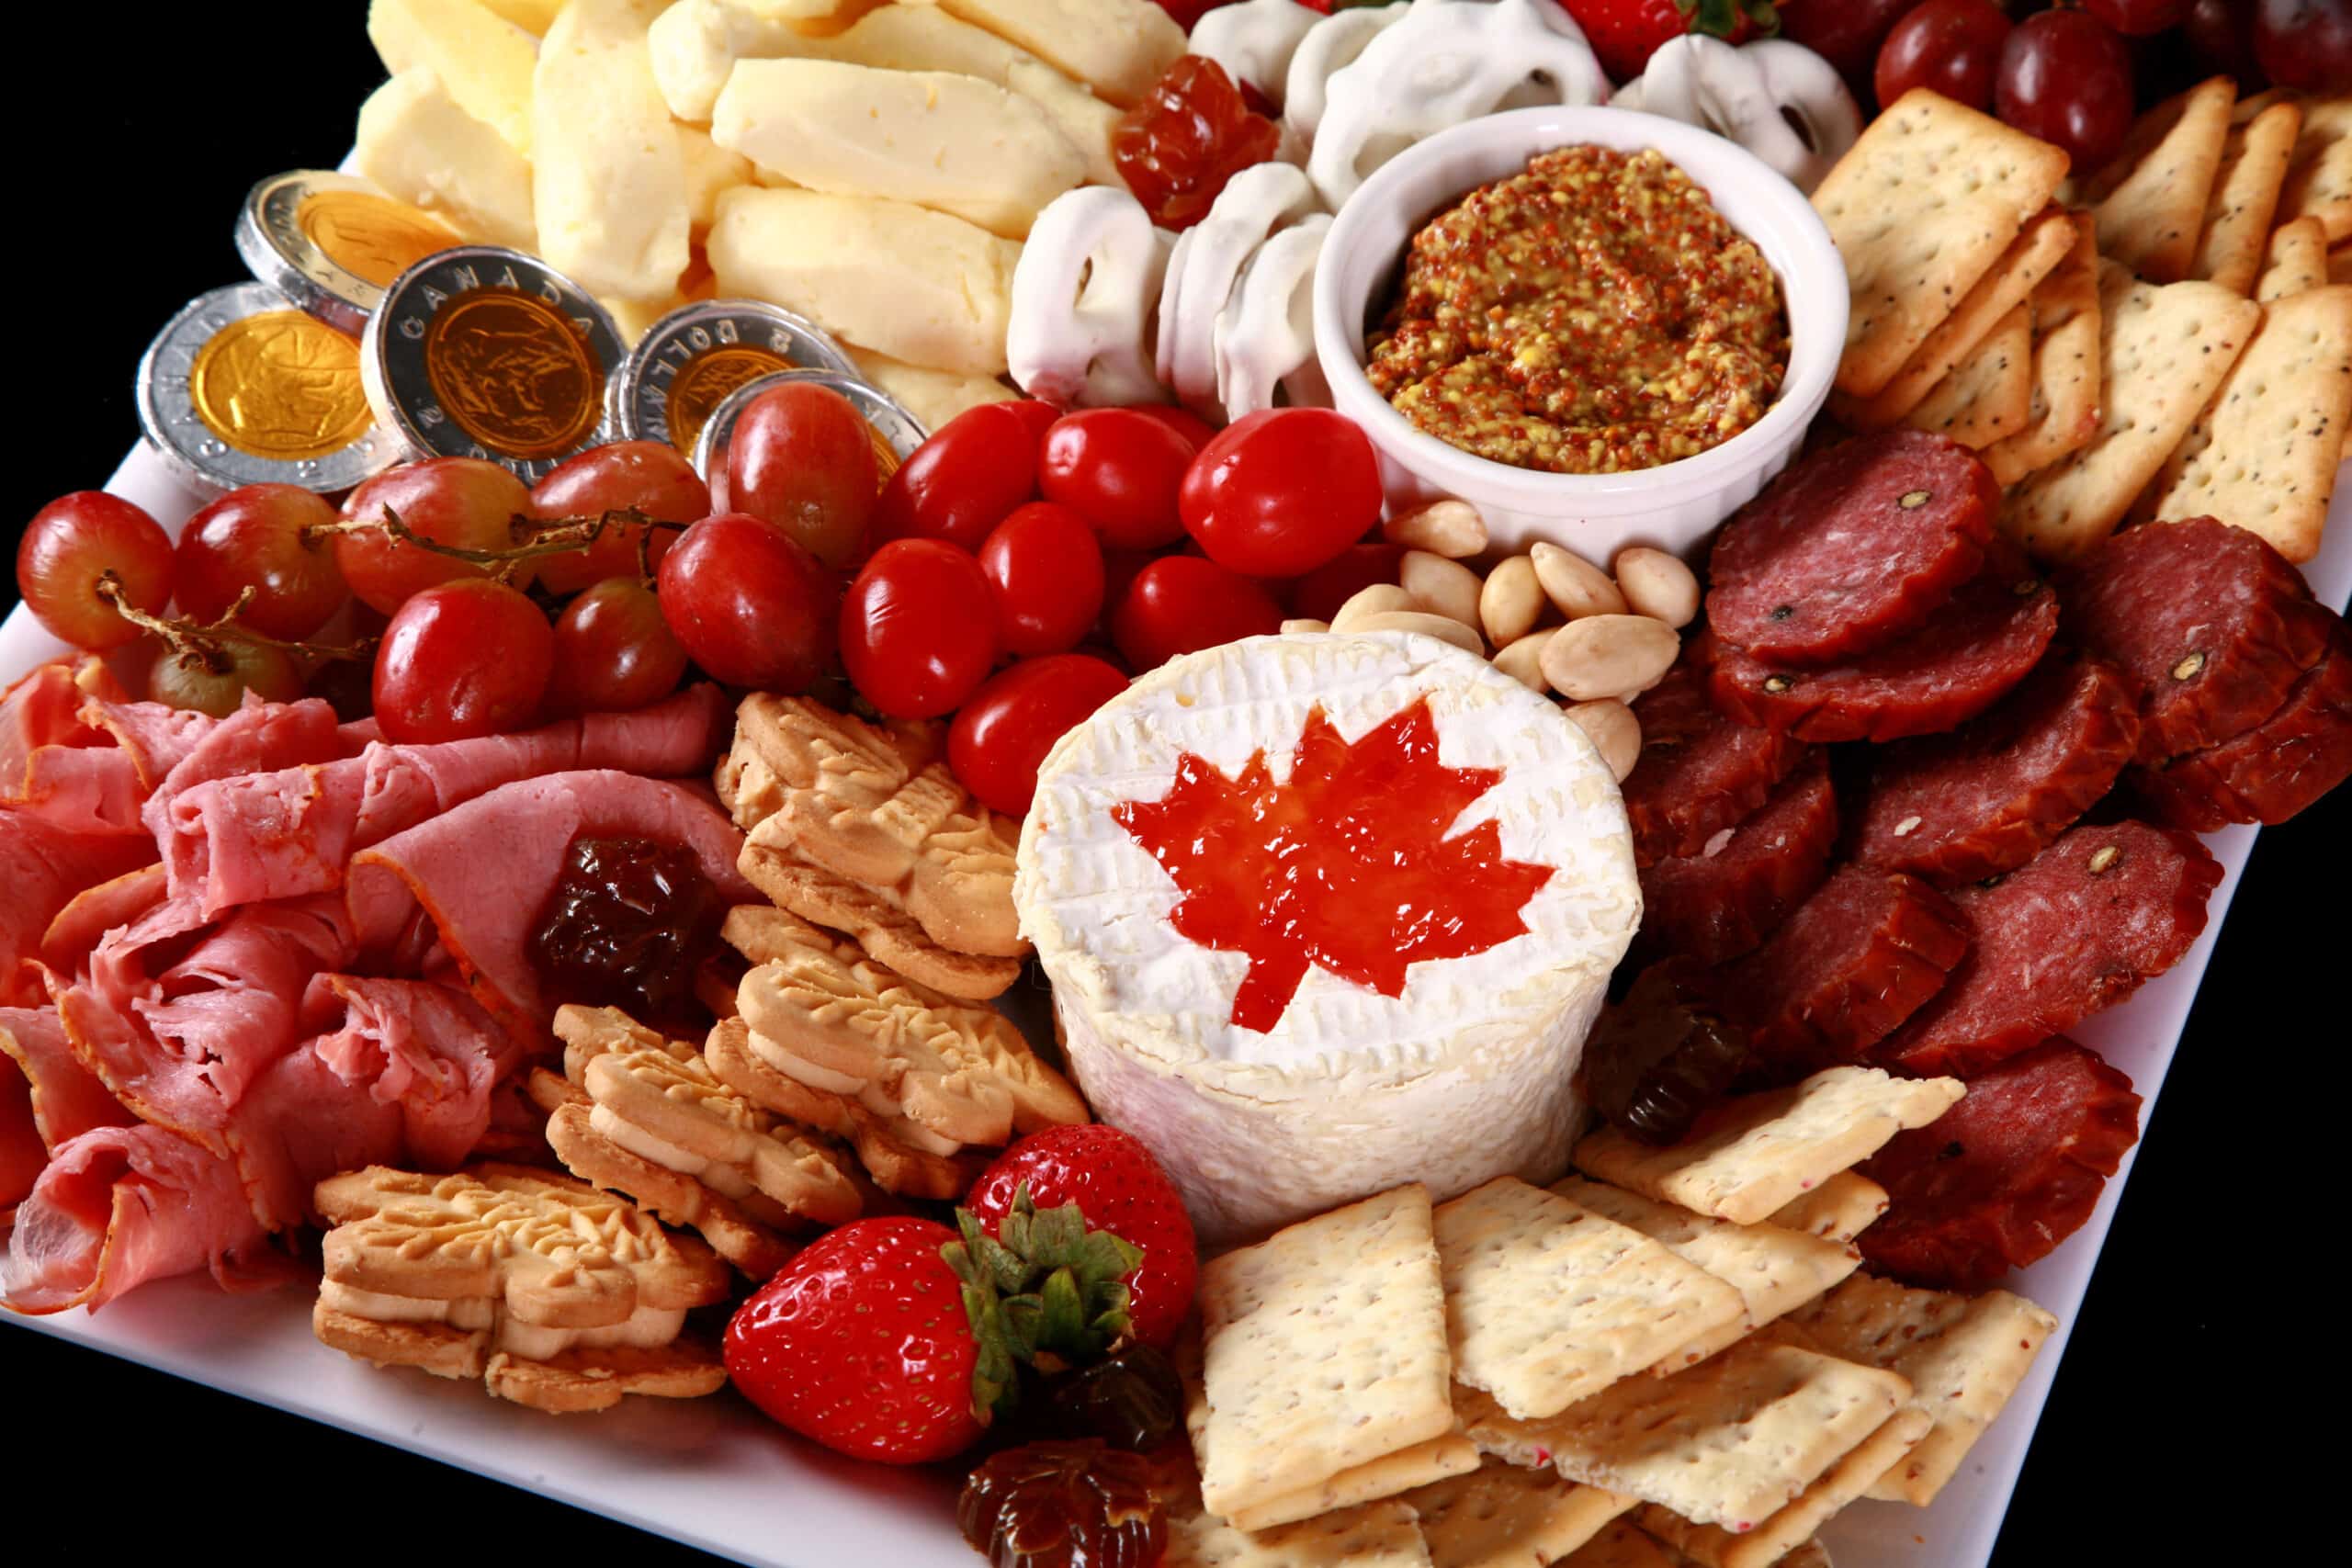 A red and white Canadian themed charcuterie board.